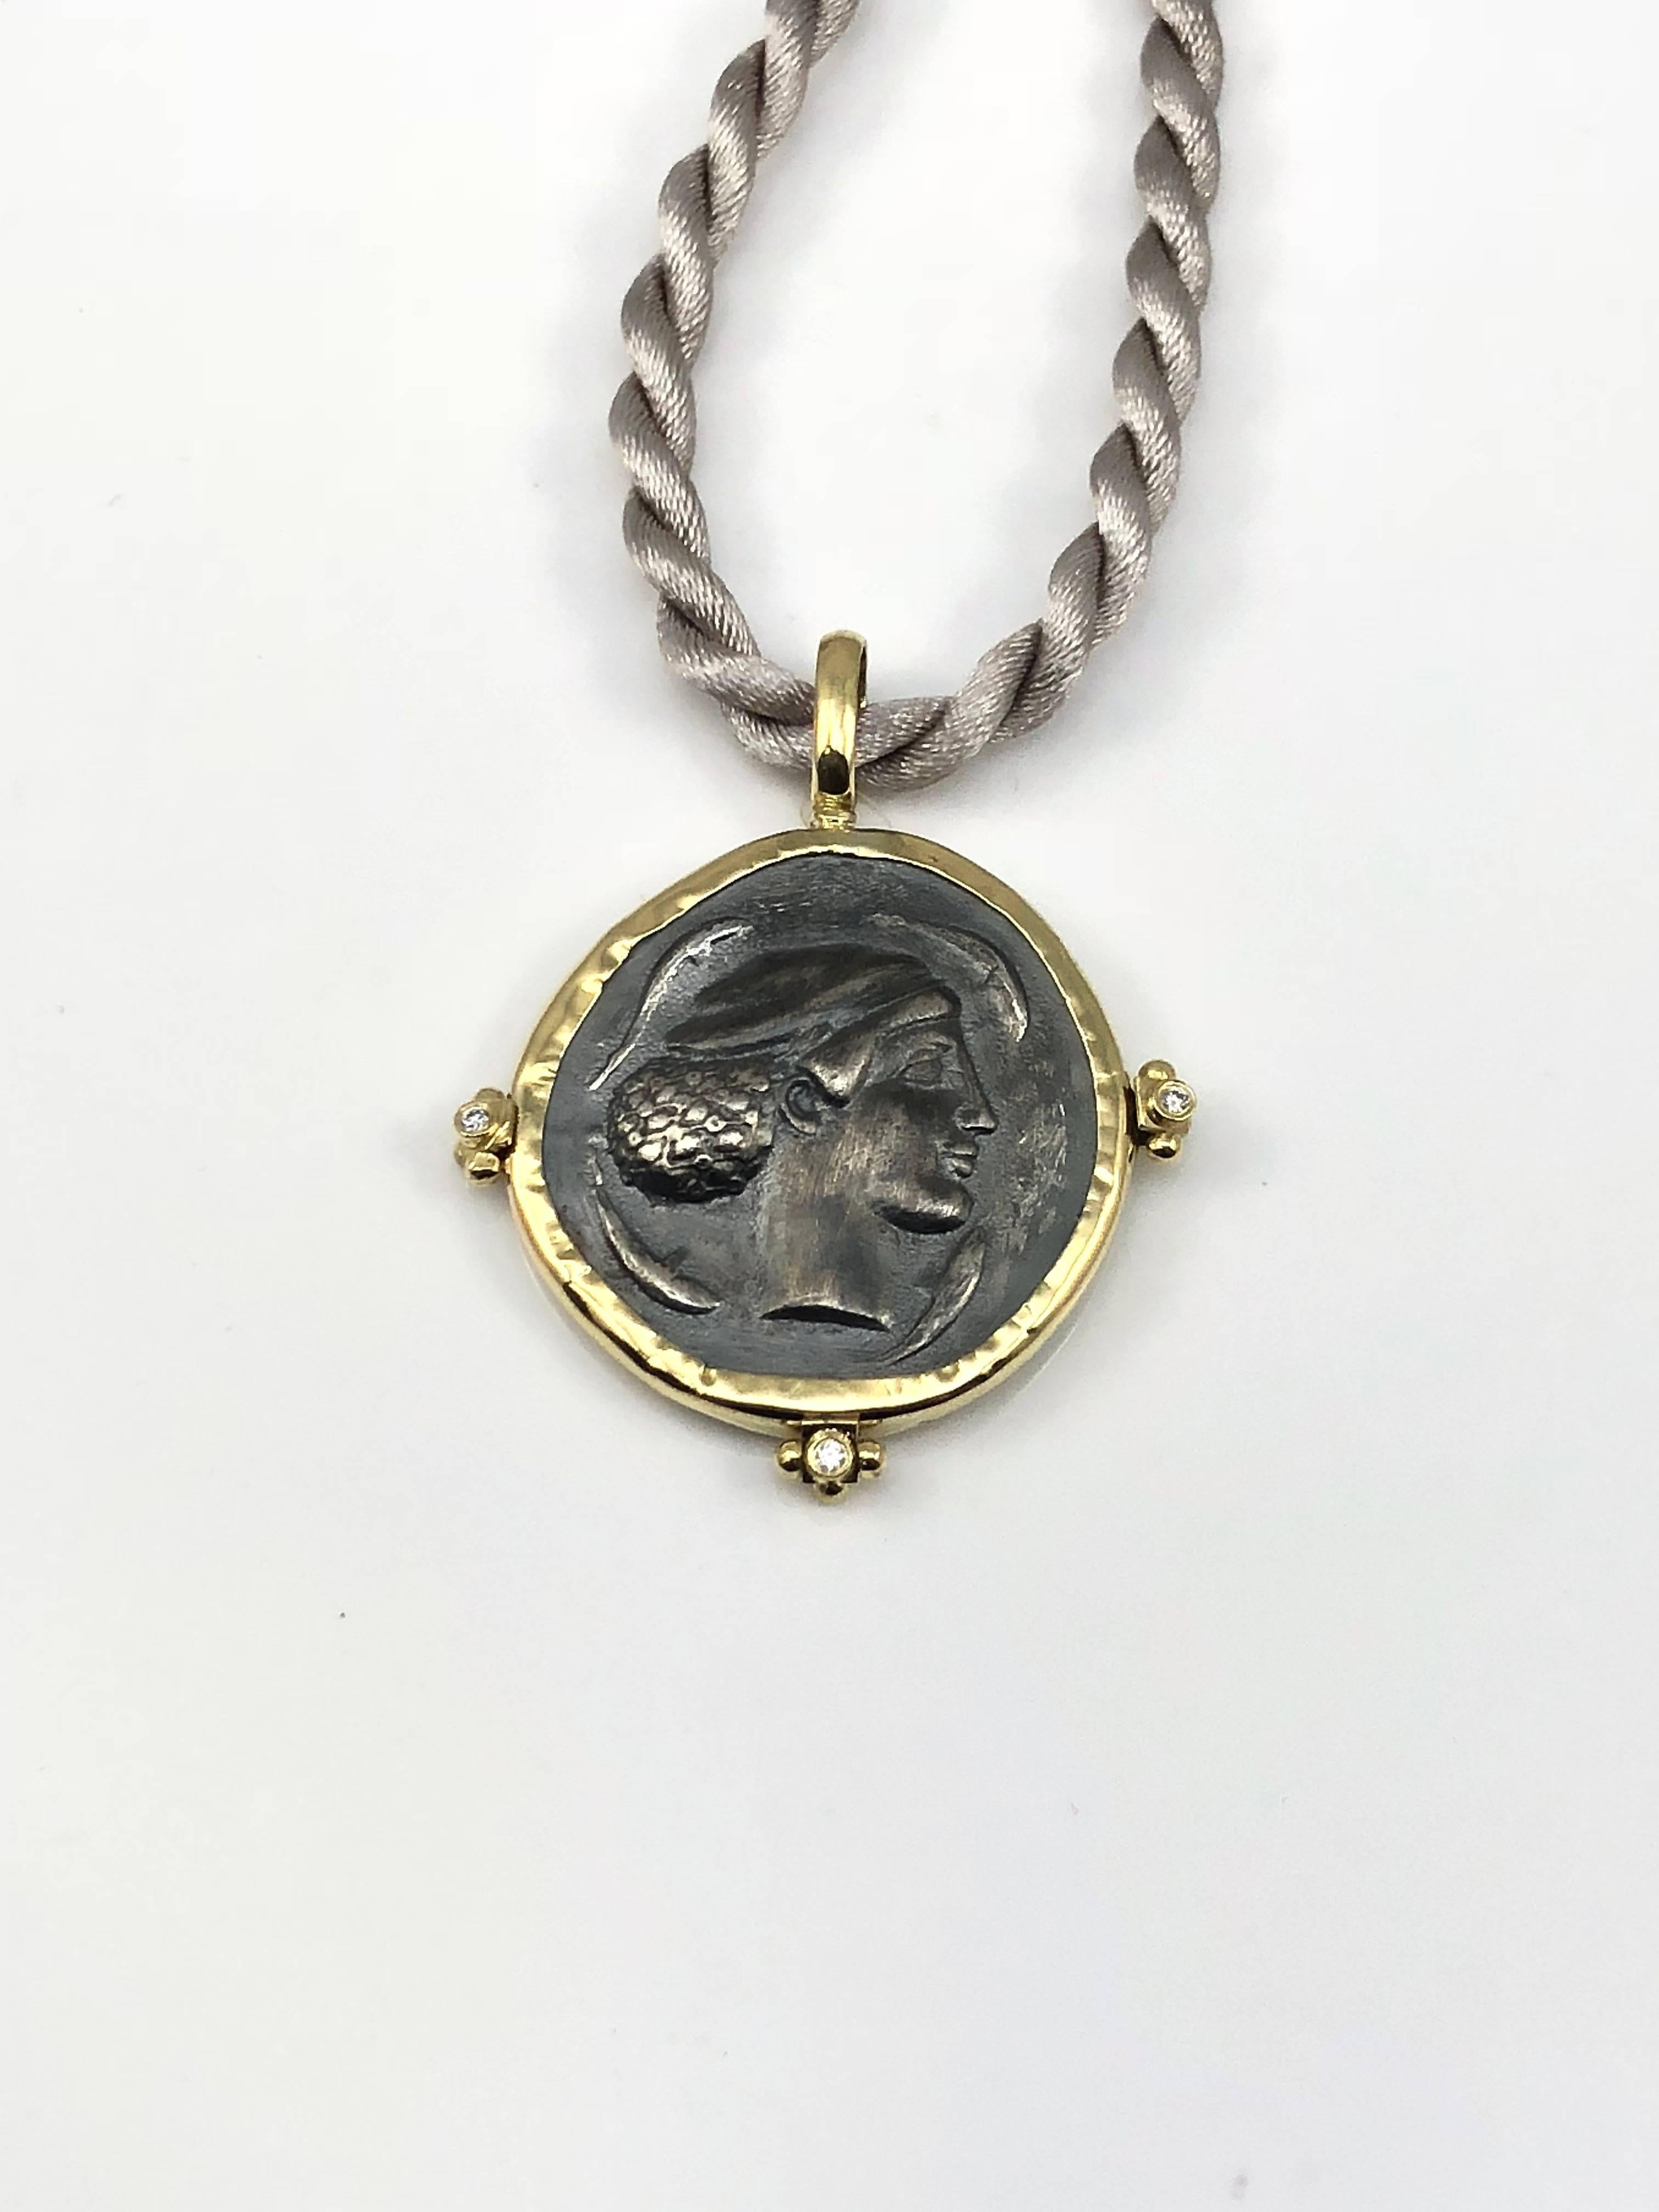 S.Georgios designer 18 Karat Yellow Gold handmade Pendant Necklace featuring 3 Brilliant cut Diamonds with a total weight of 0.03 Carat and a replica of an Ancient Greek Dimitra Coin in Silver 925. The coin has a beautiful reverse side and can be